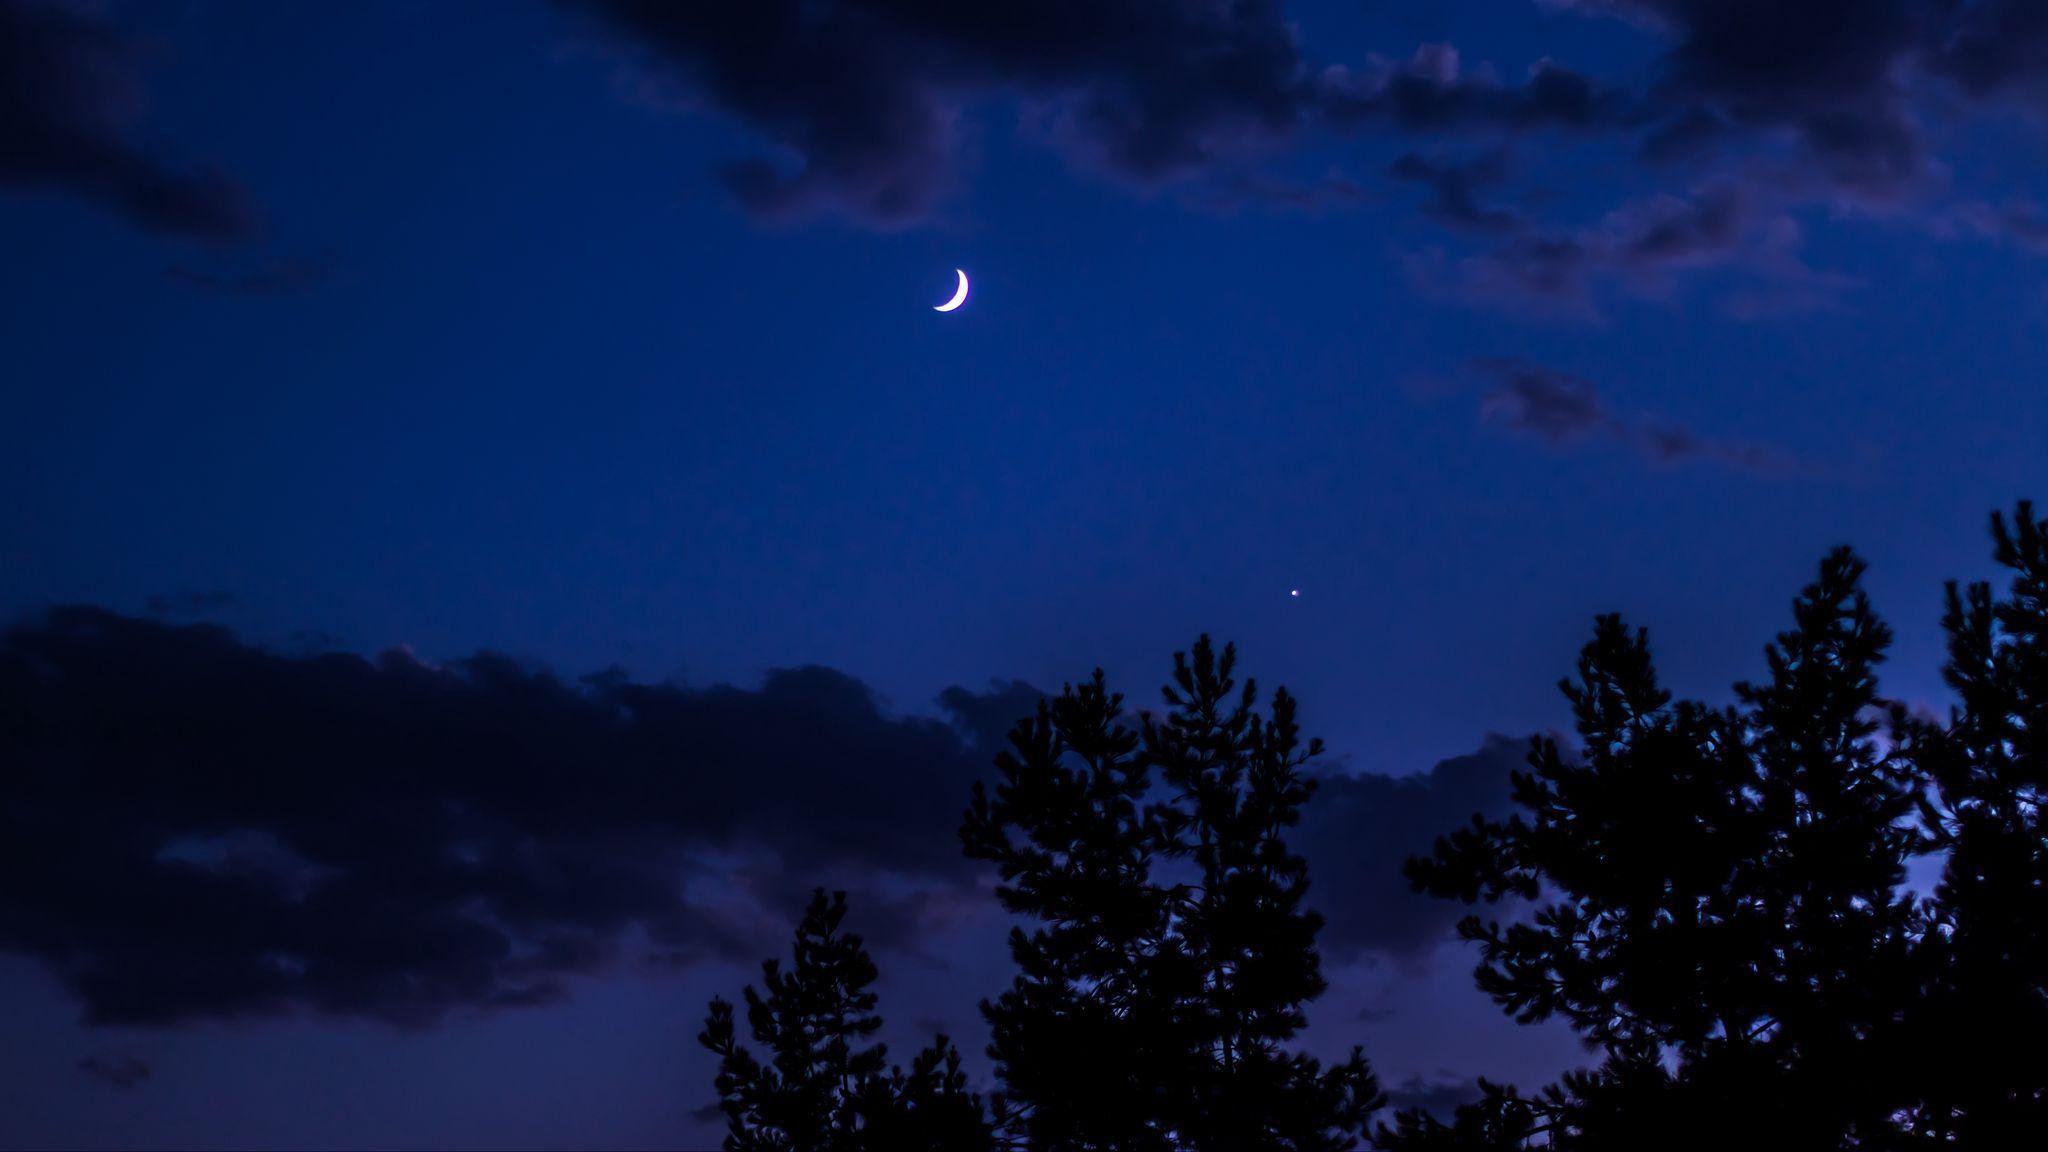 Download wallpaper 2048x1152 night, moon, sky, clouds, trees ultrawide monitor HD background